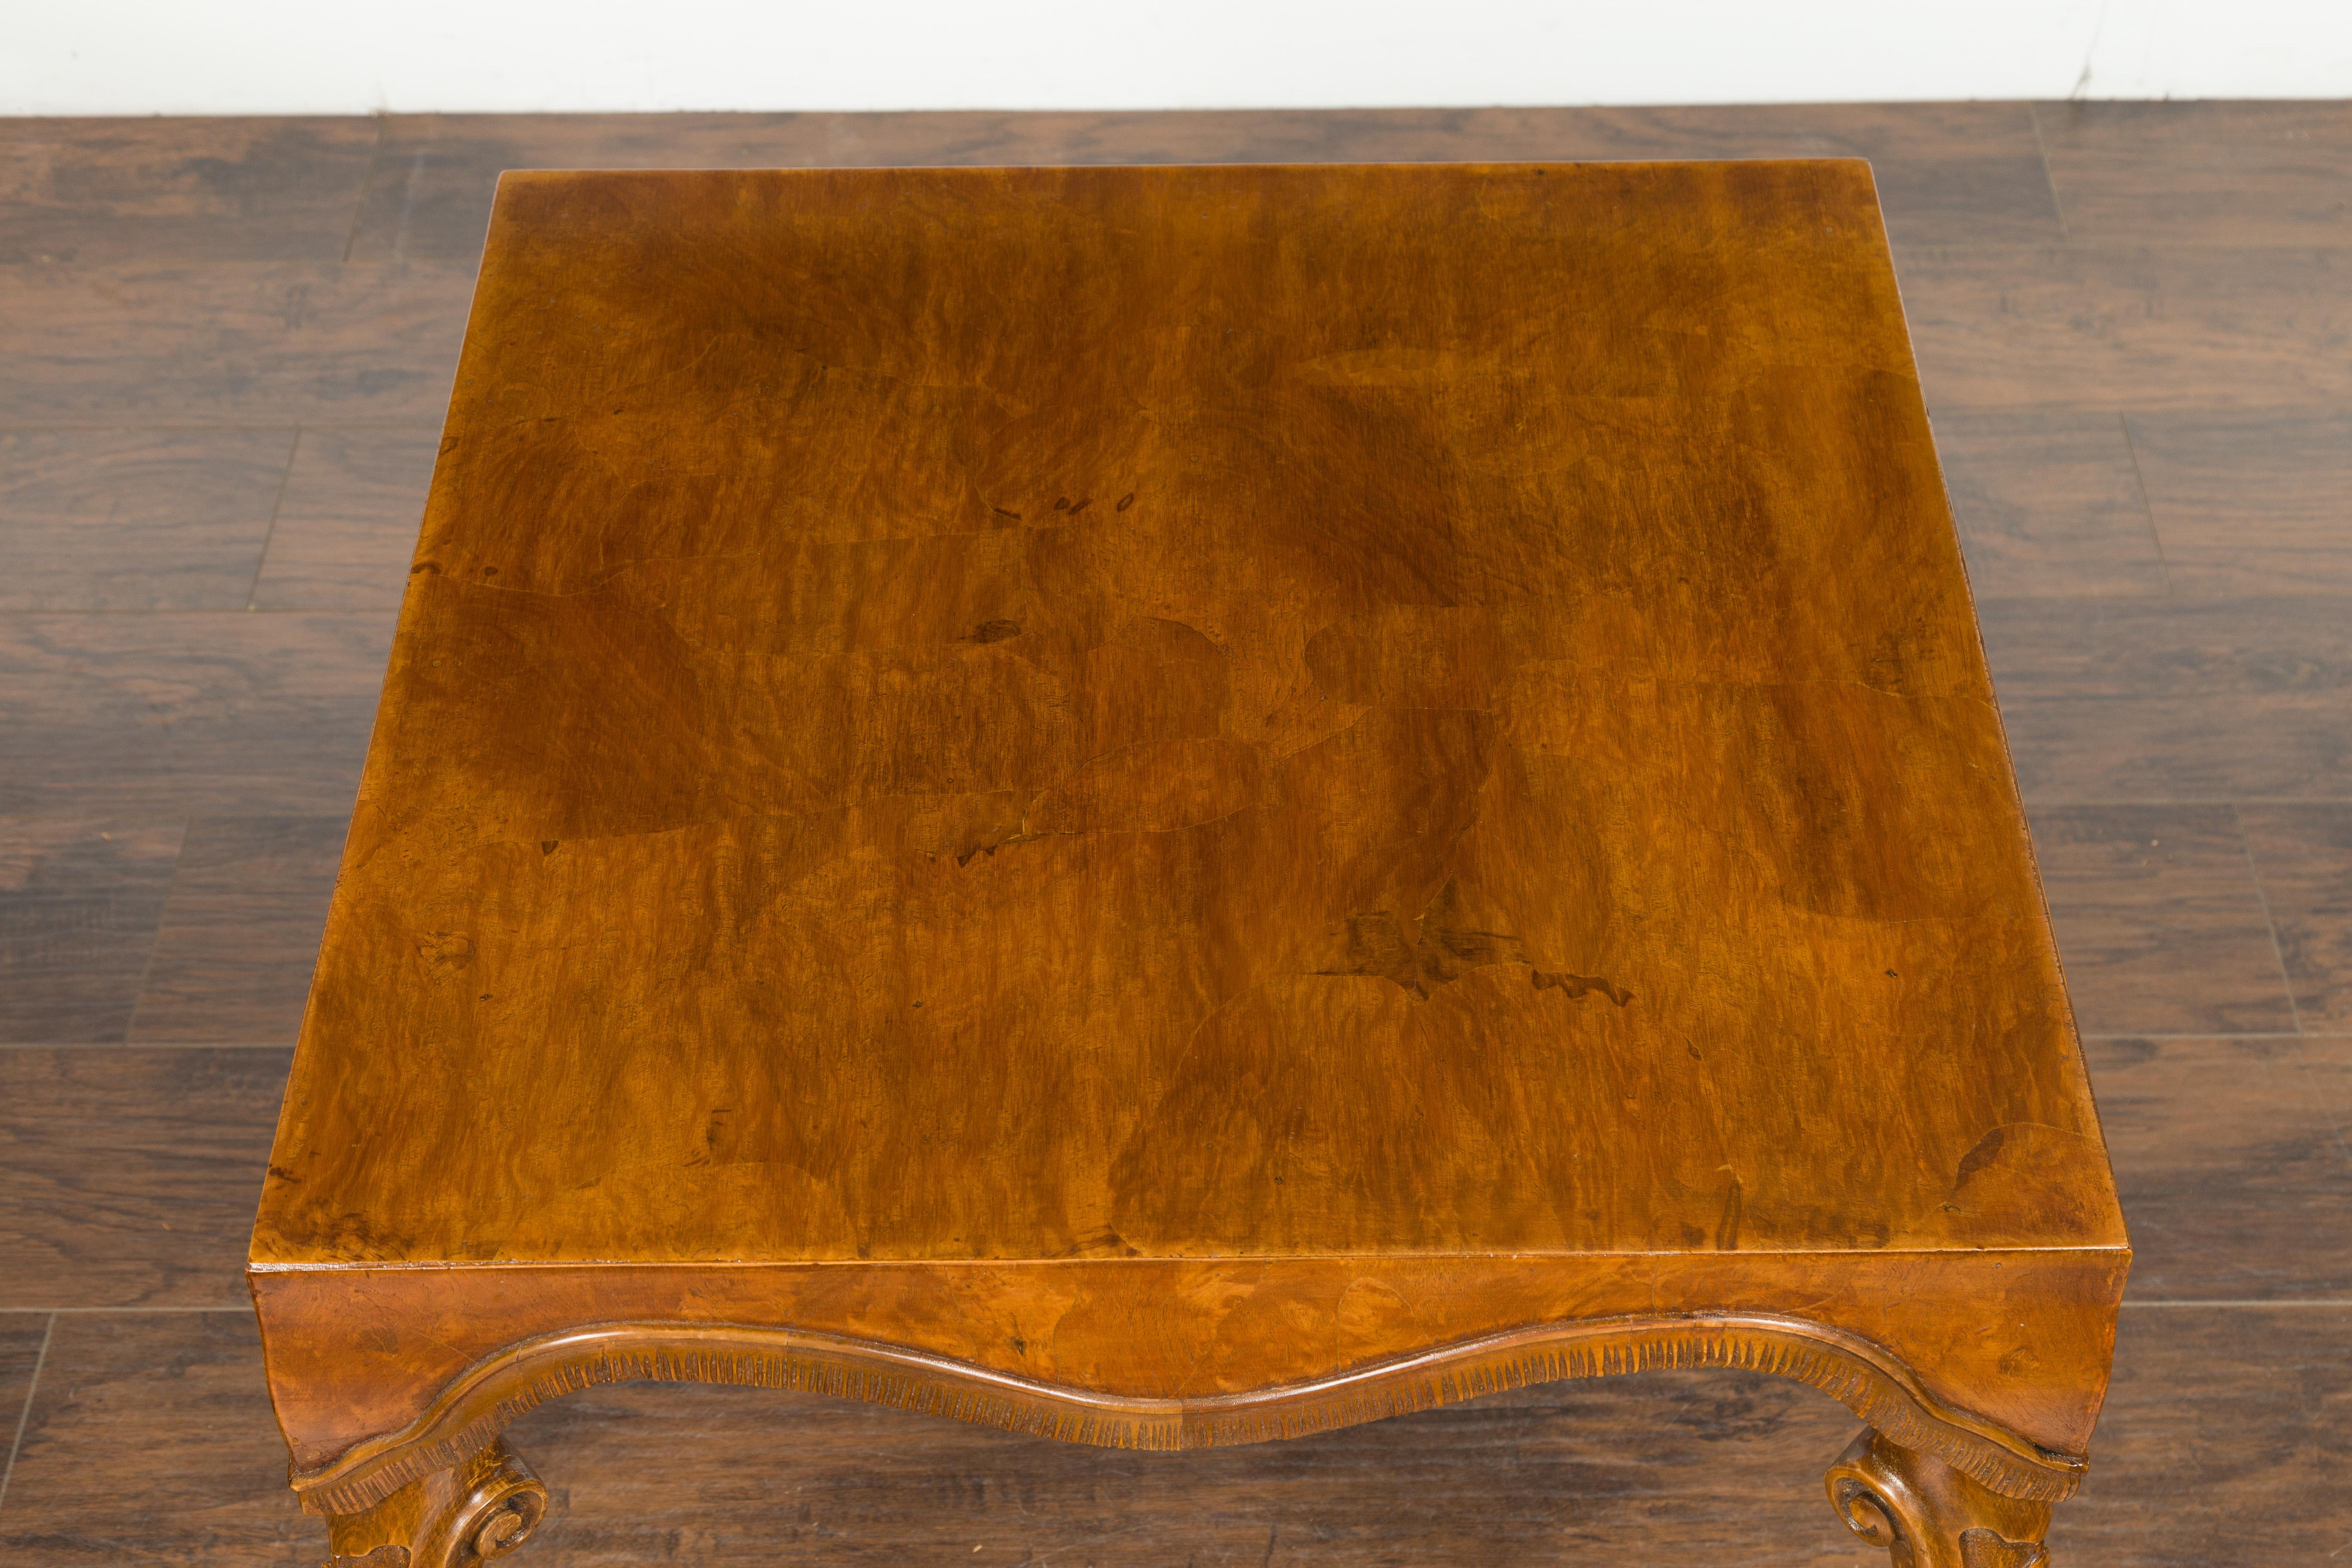 Italian Rococo Style Midcentury Walnut and Olive Wood Table with Cabriole Legs For Sale 1